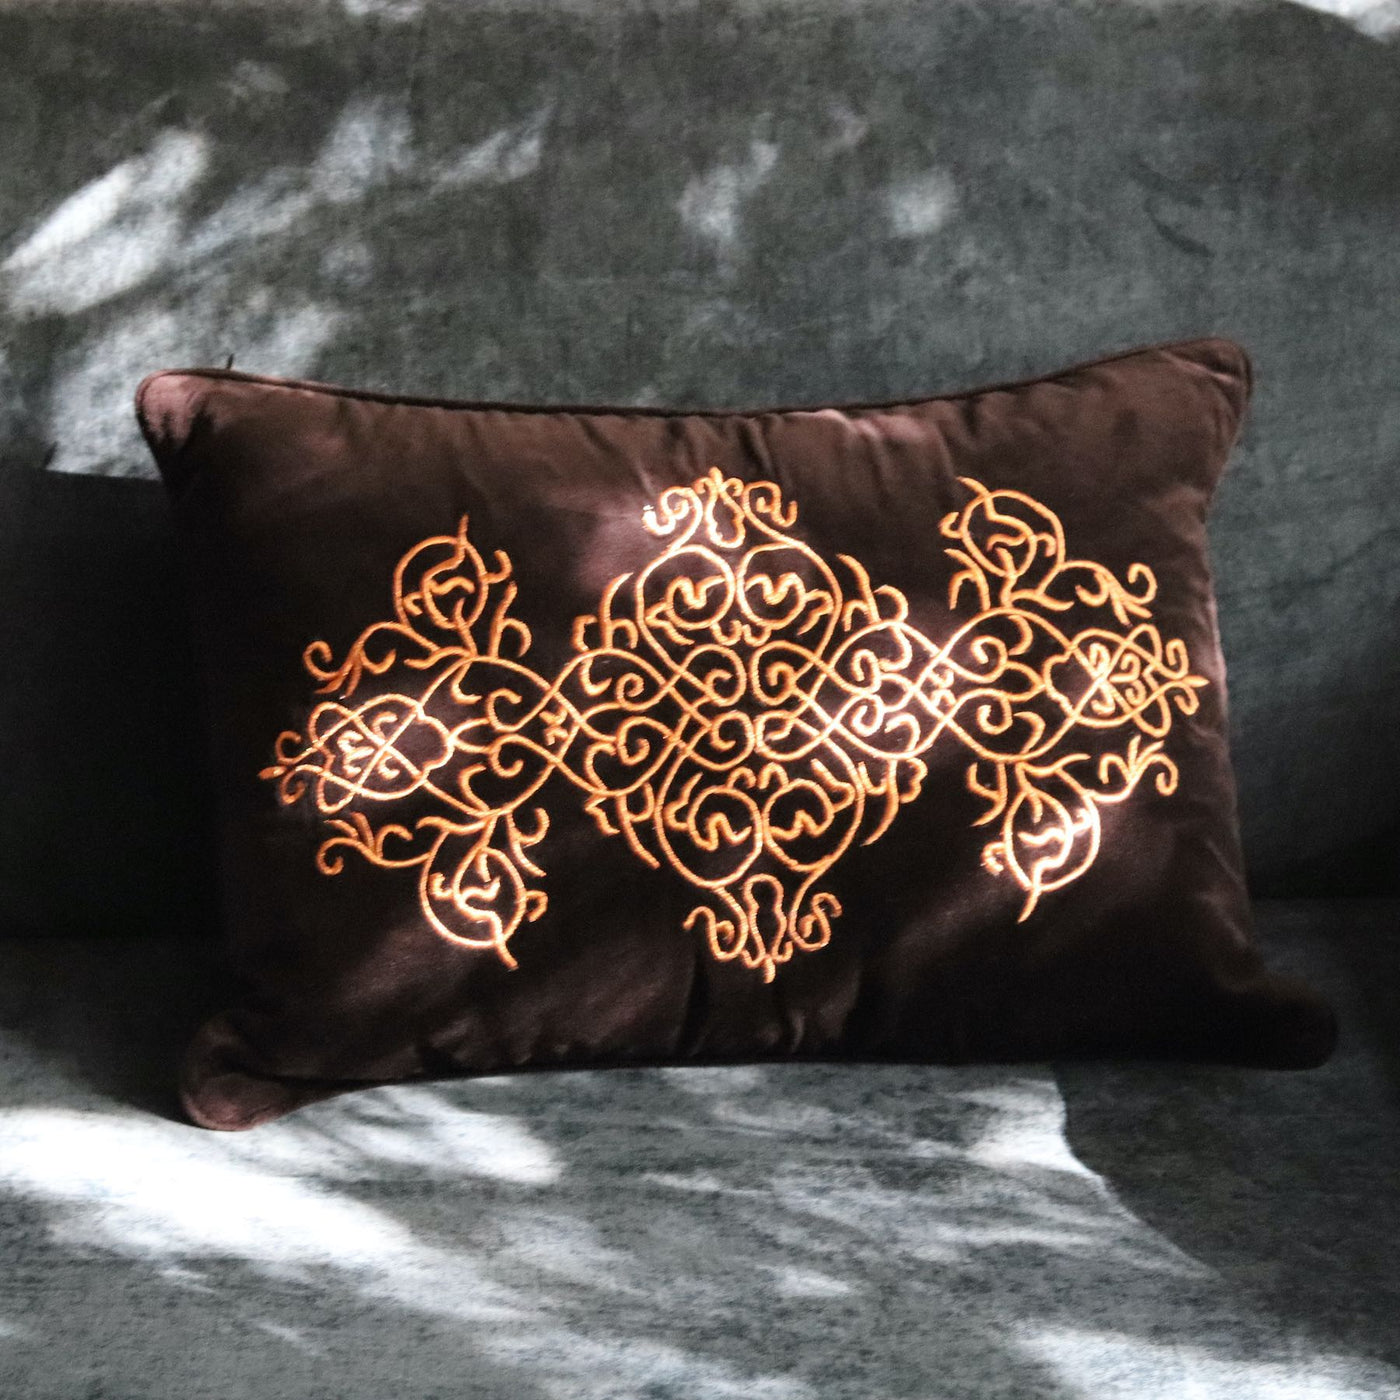 embroidered velvet cushions with a celtic pattern